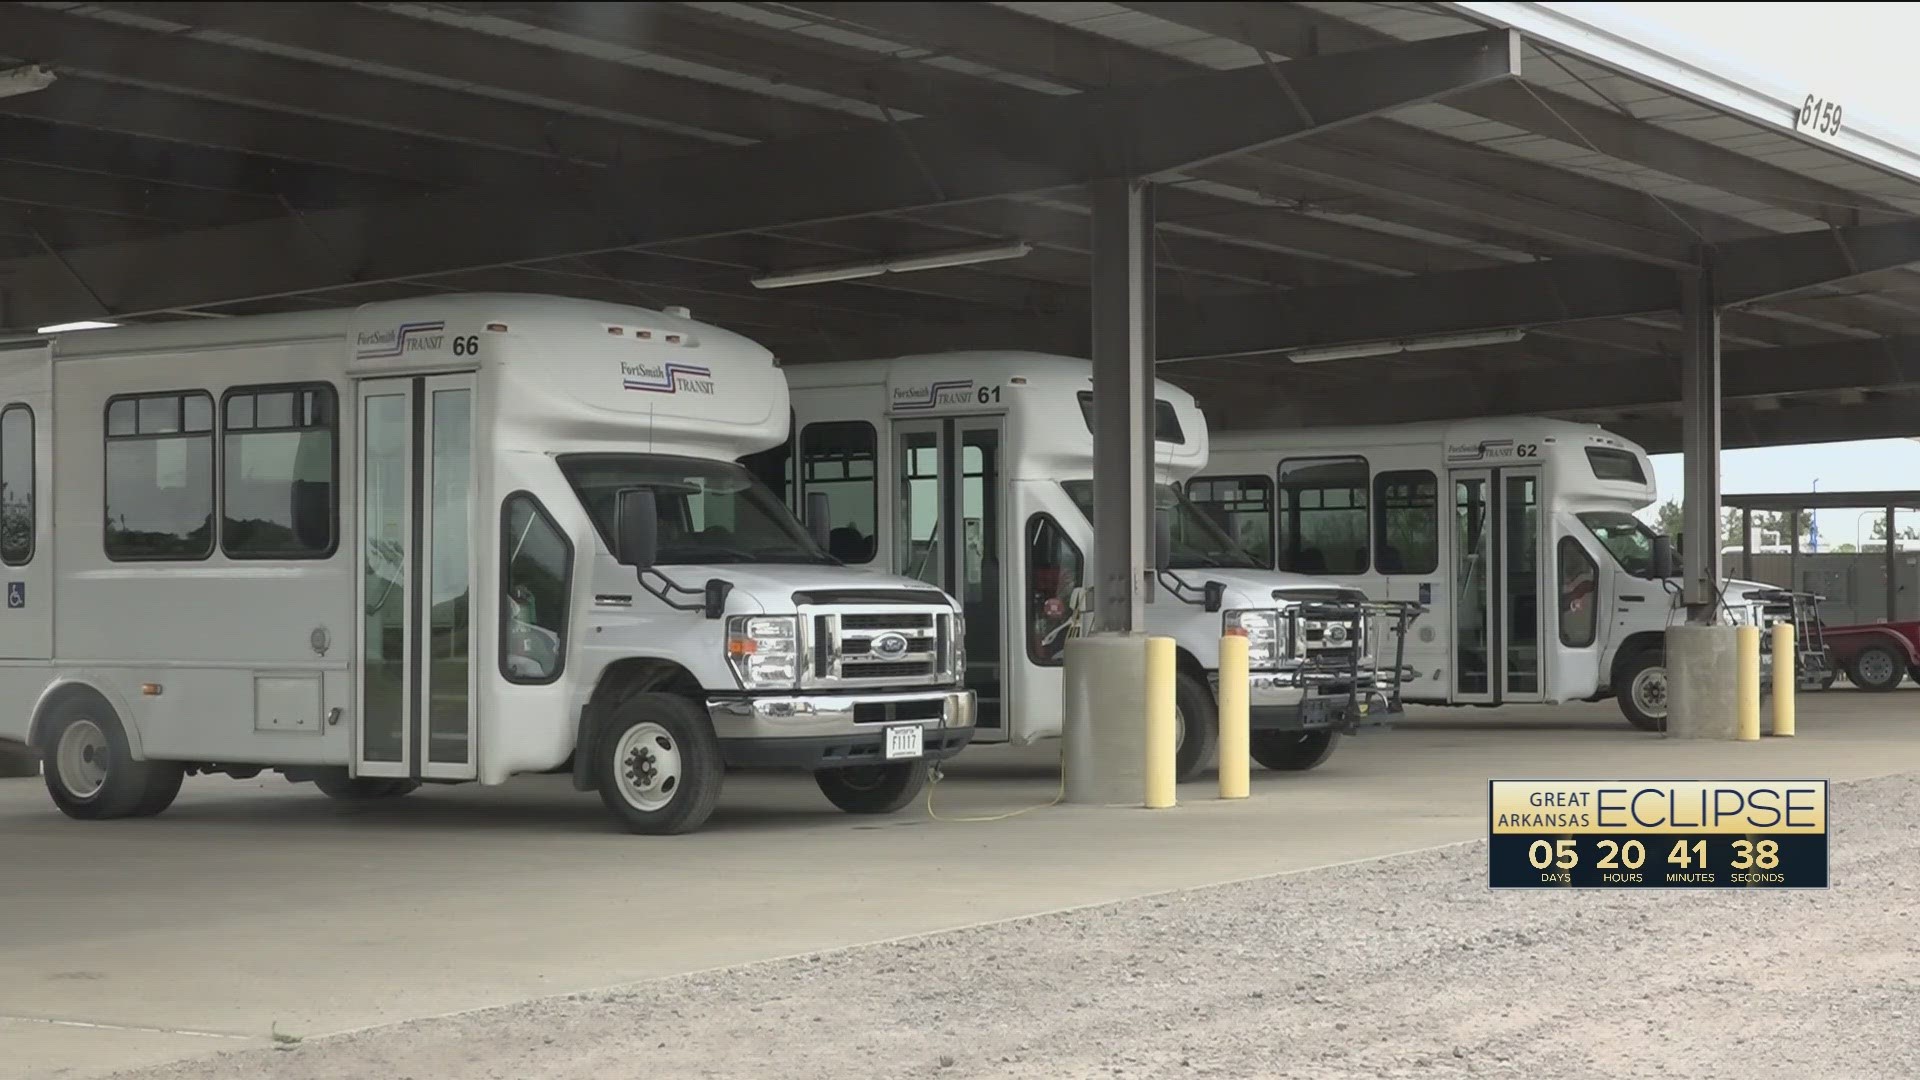 With more people expected to come to the area on April 8, Fort Smith Public Transit is working to prevent as much traffic congestion as possible.